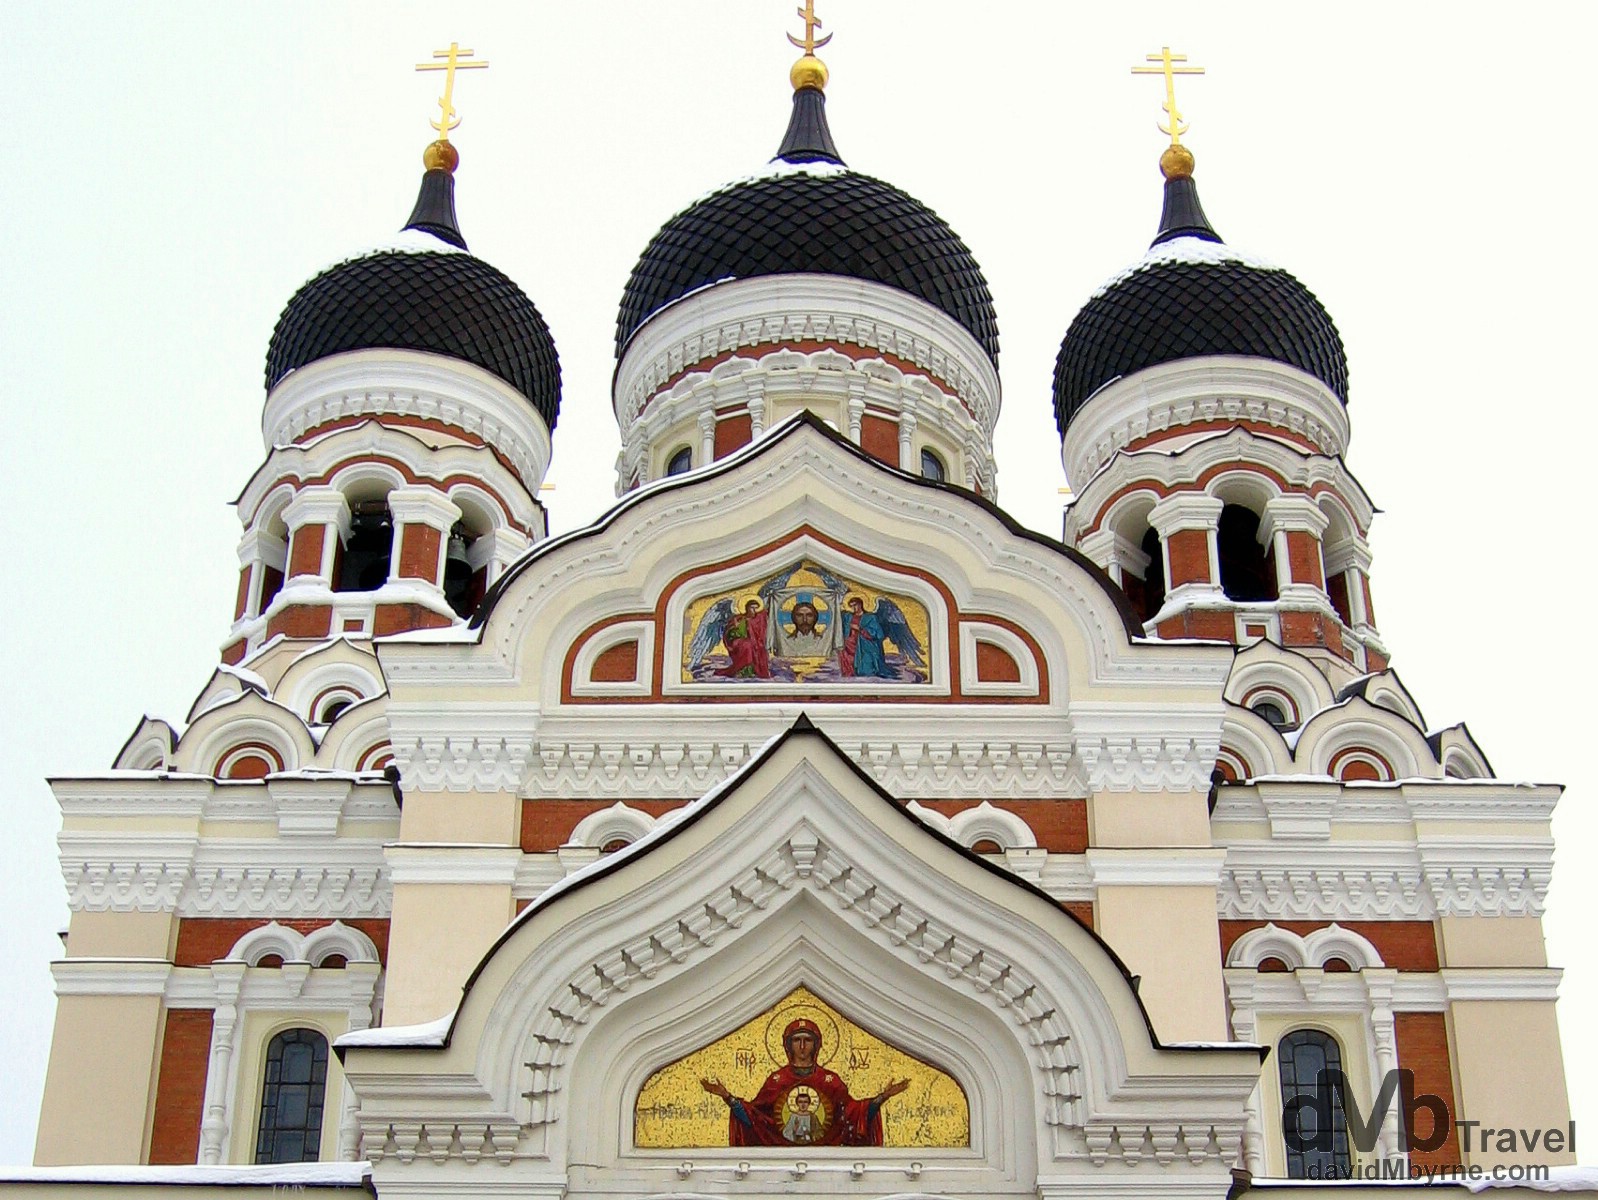 The facade of the Alexander Nevsky Cathedral, the largest and grandest orthodox church in the Old Town of Tallinn, Estonia. March 2, 2006.